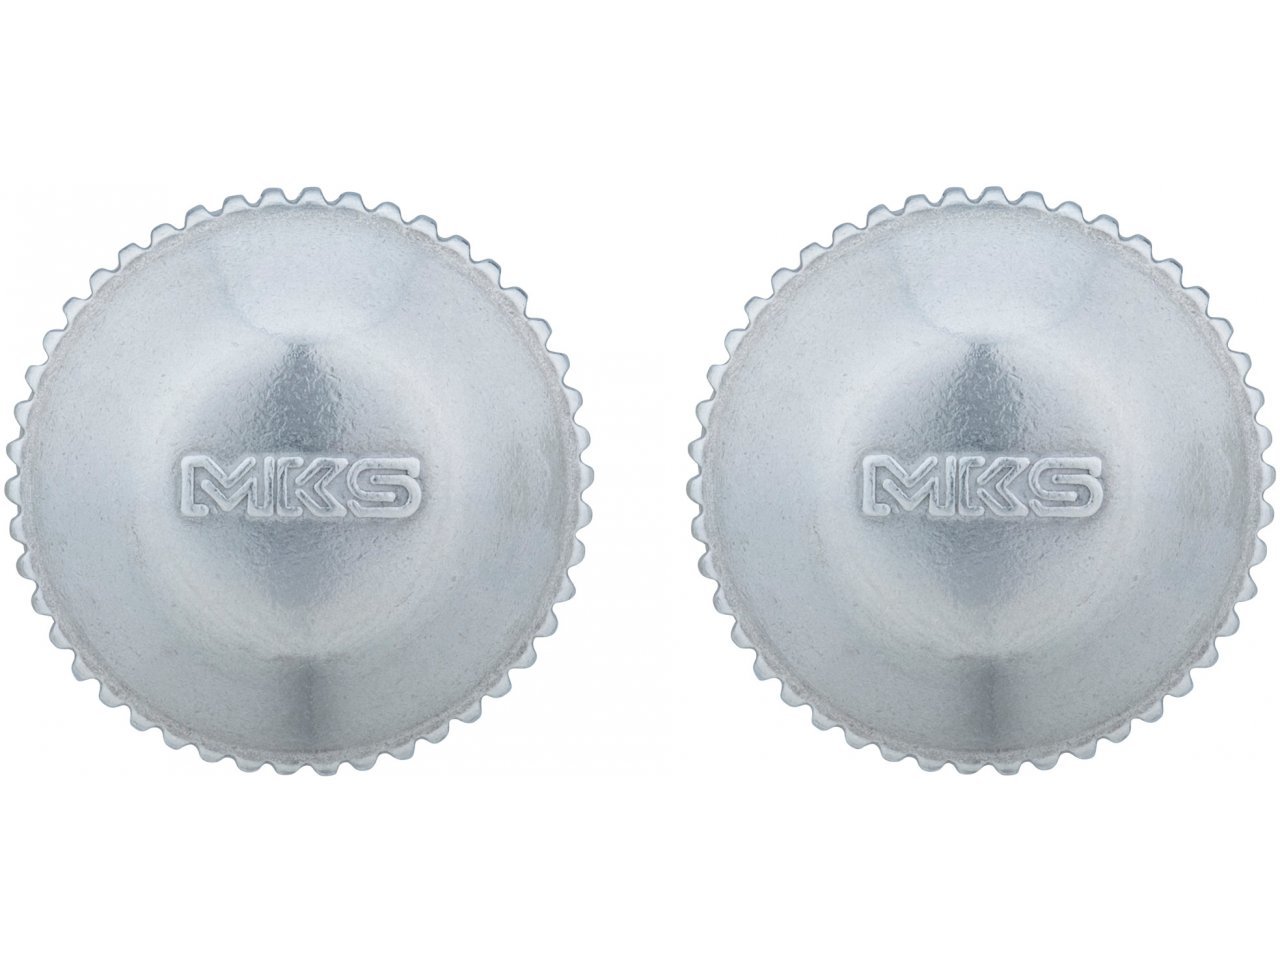 MKS Alloy Caps - Pair Pedals - Cyclop.in